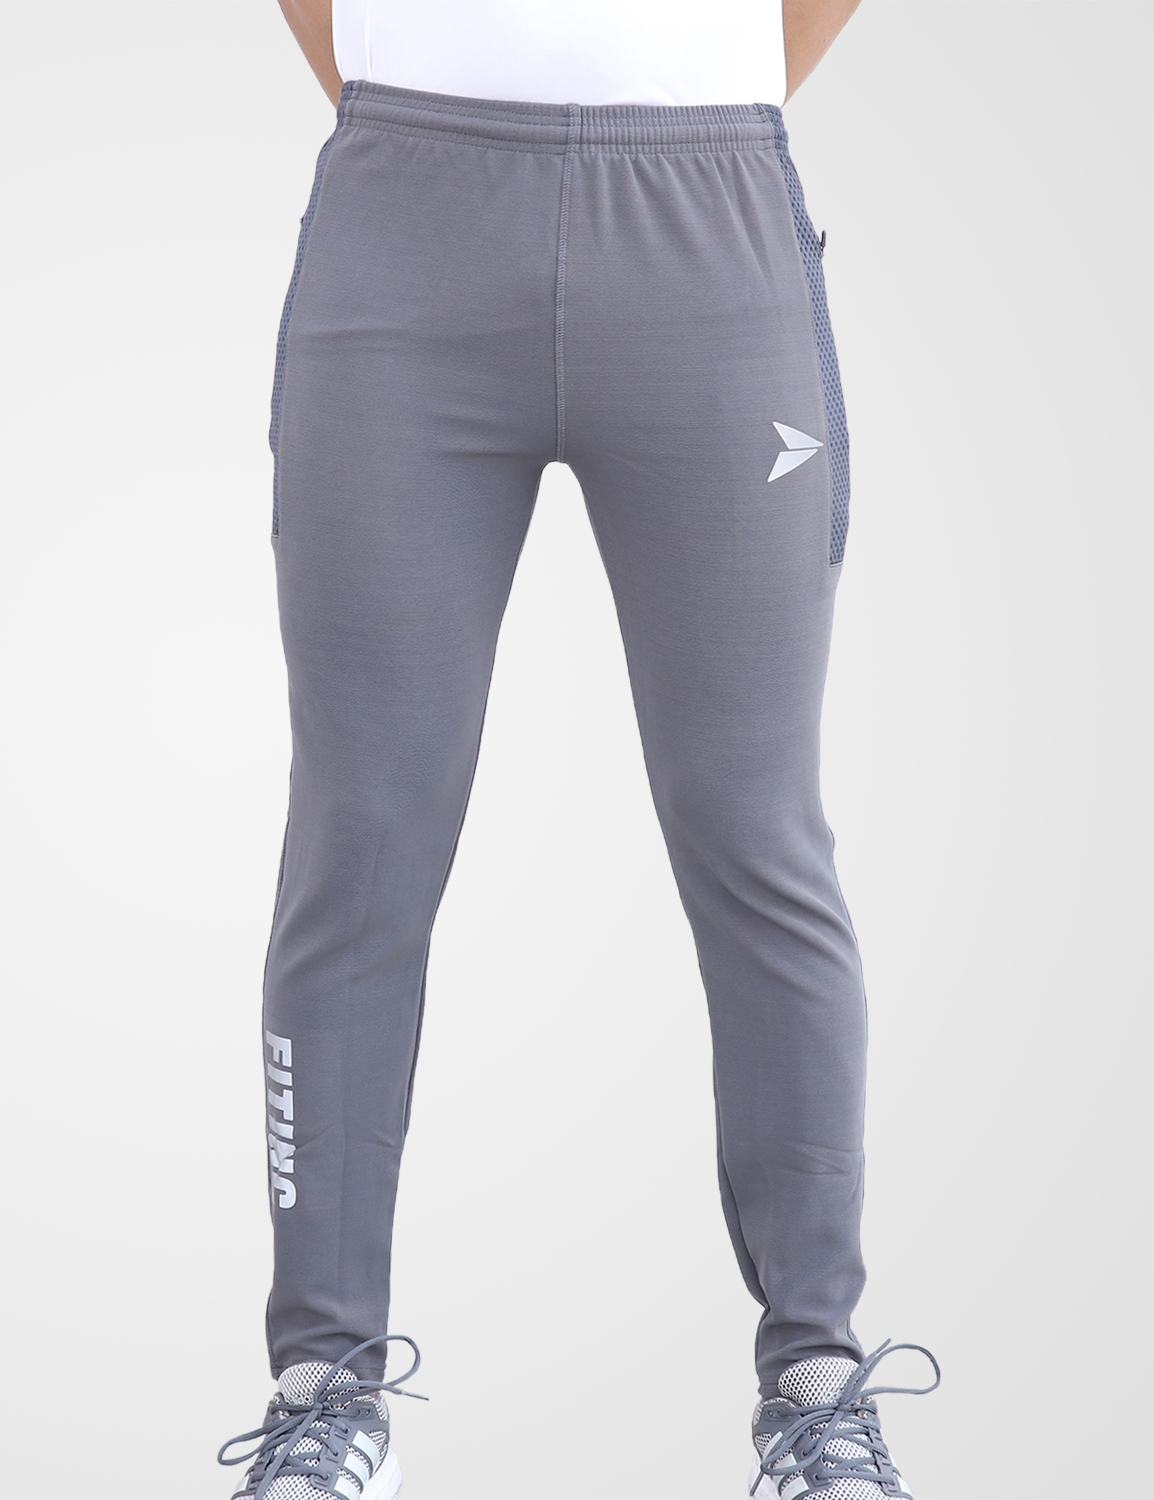 Fitinc | Fitinc Dobby Grey Track Pant for Men with Zipper Pockets